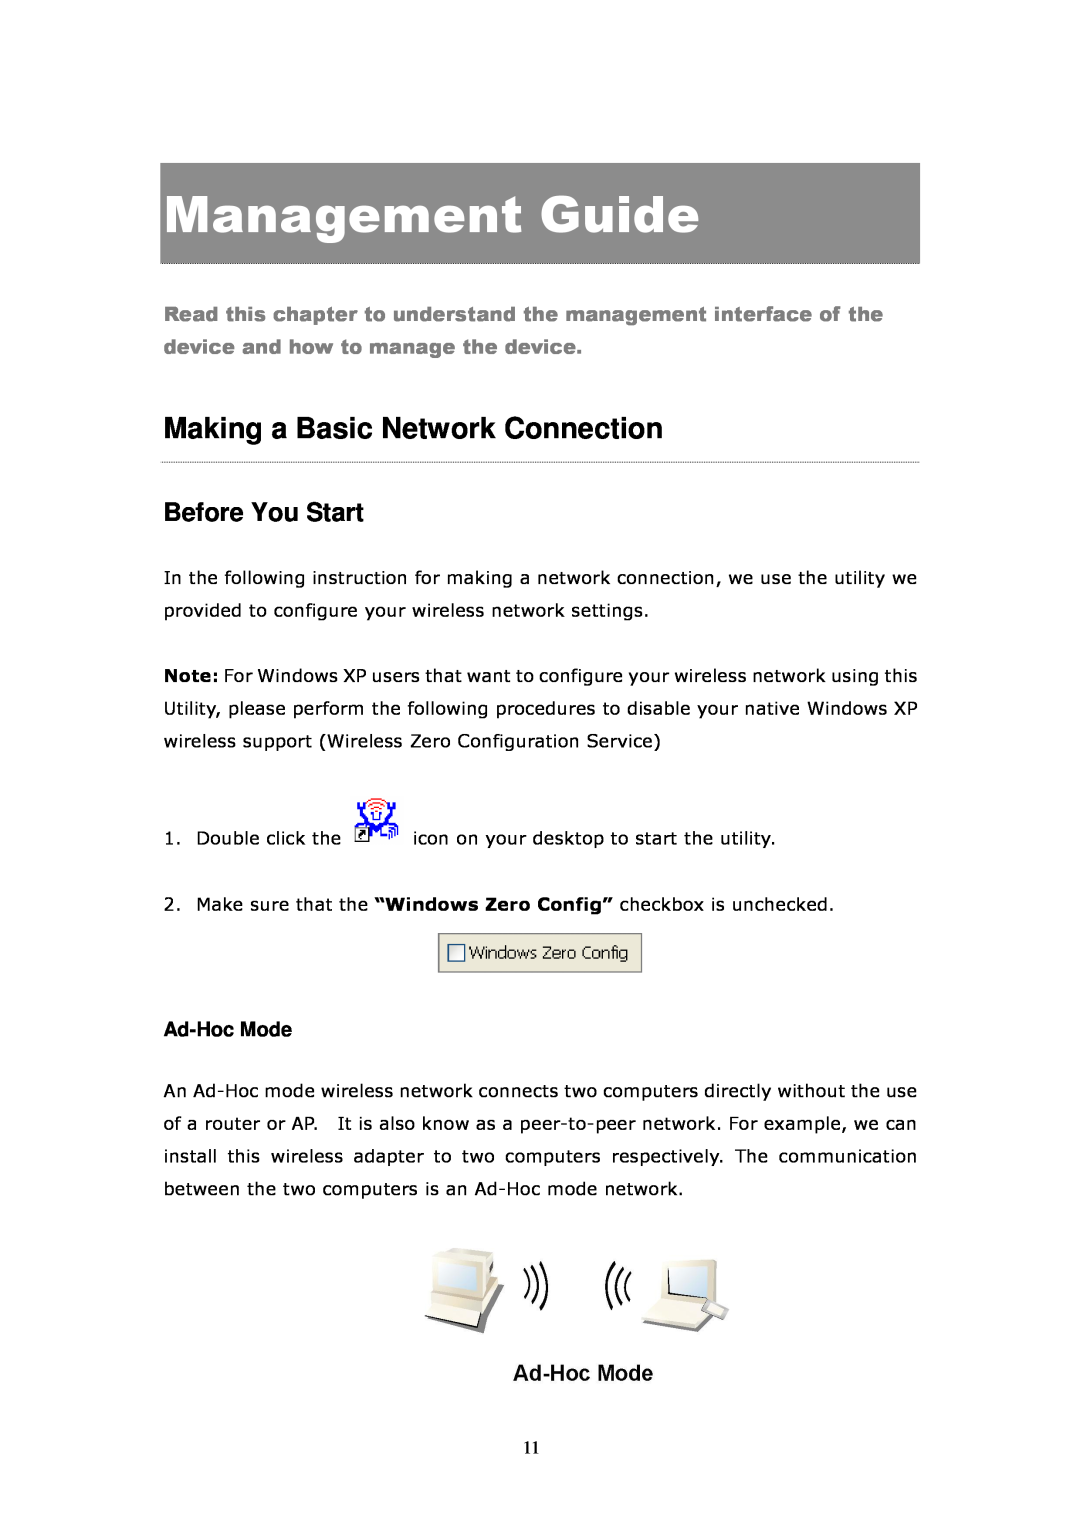 Billion Electric Company 3013G Management Guide, Making a Basic Network Connection, Before You Start, Ad-Hoc Mode 